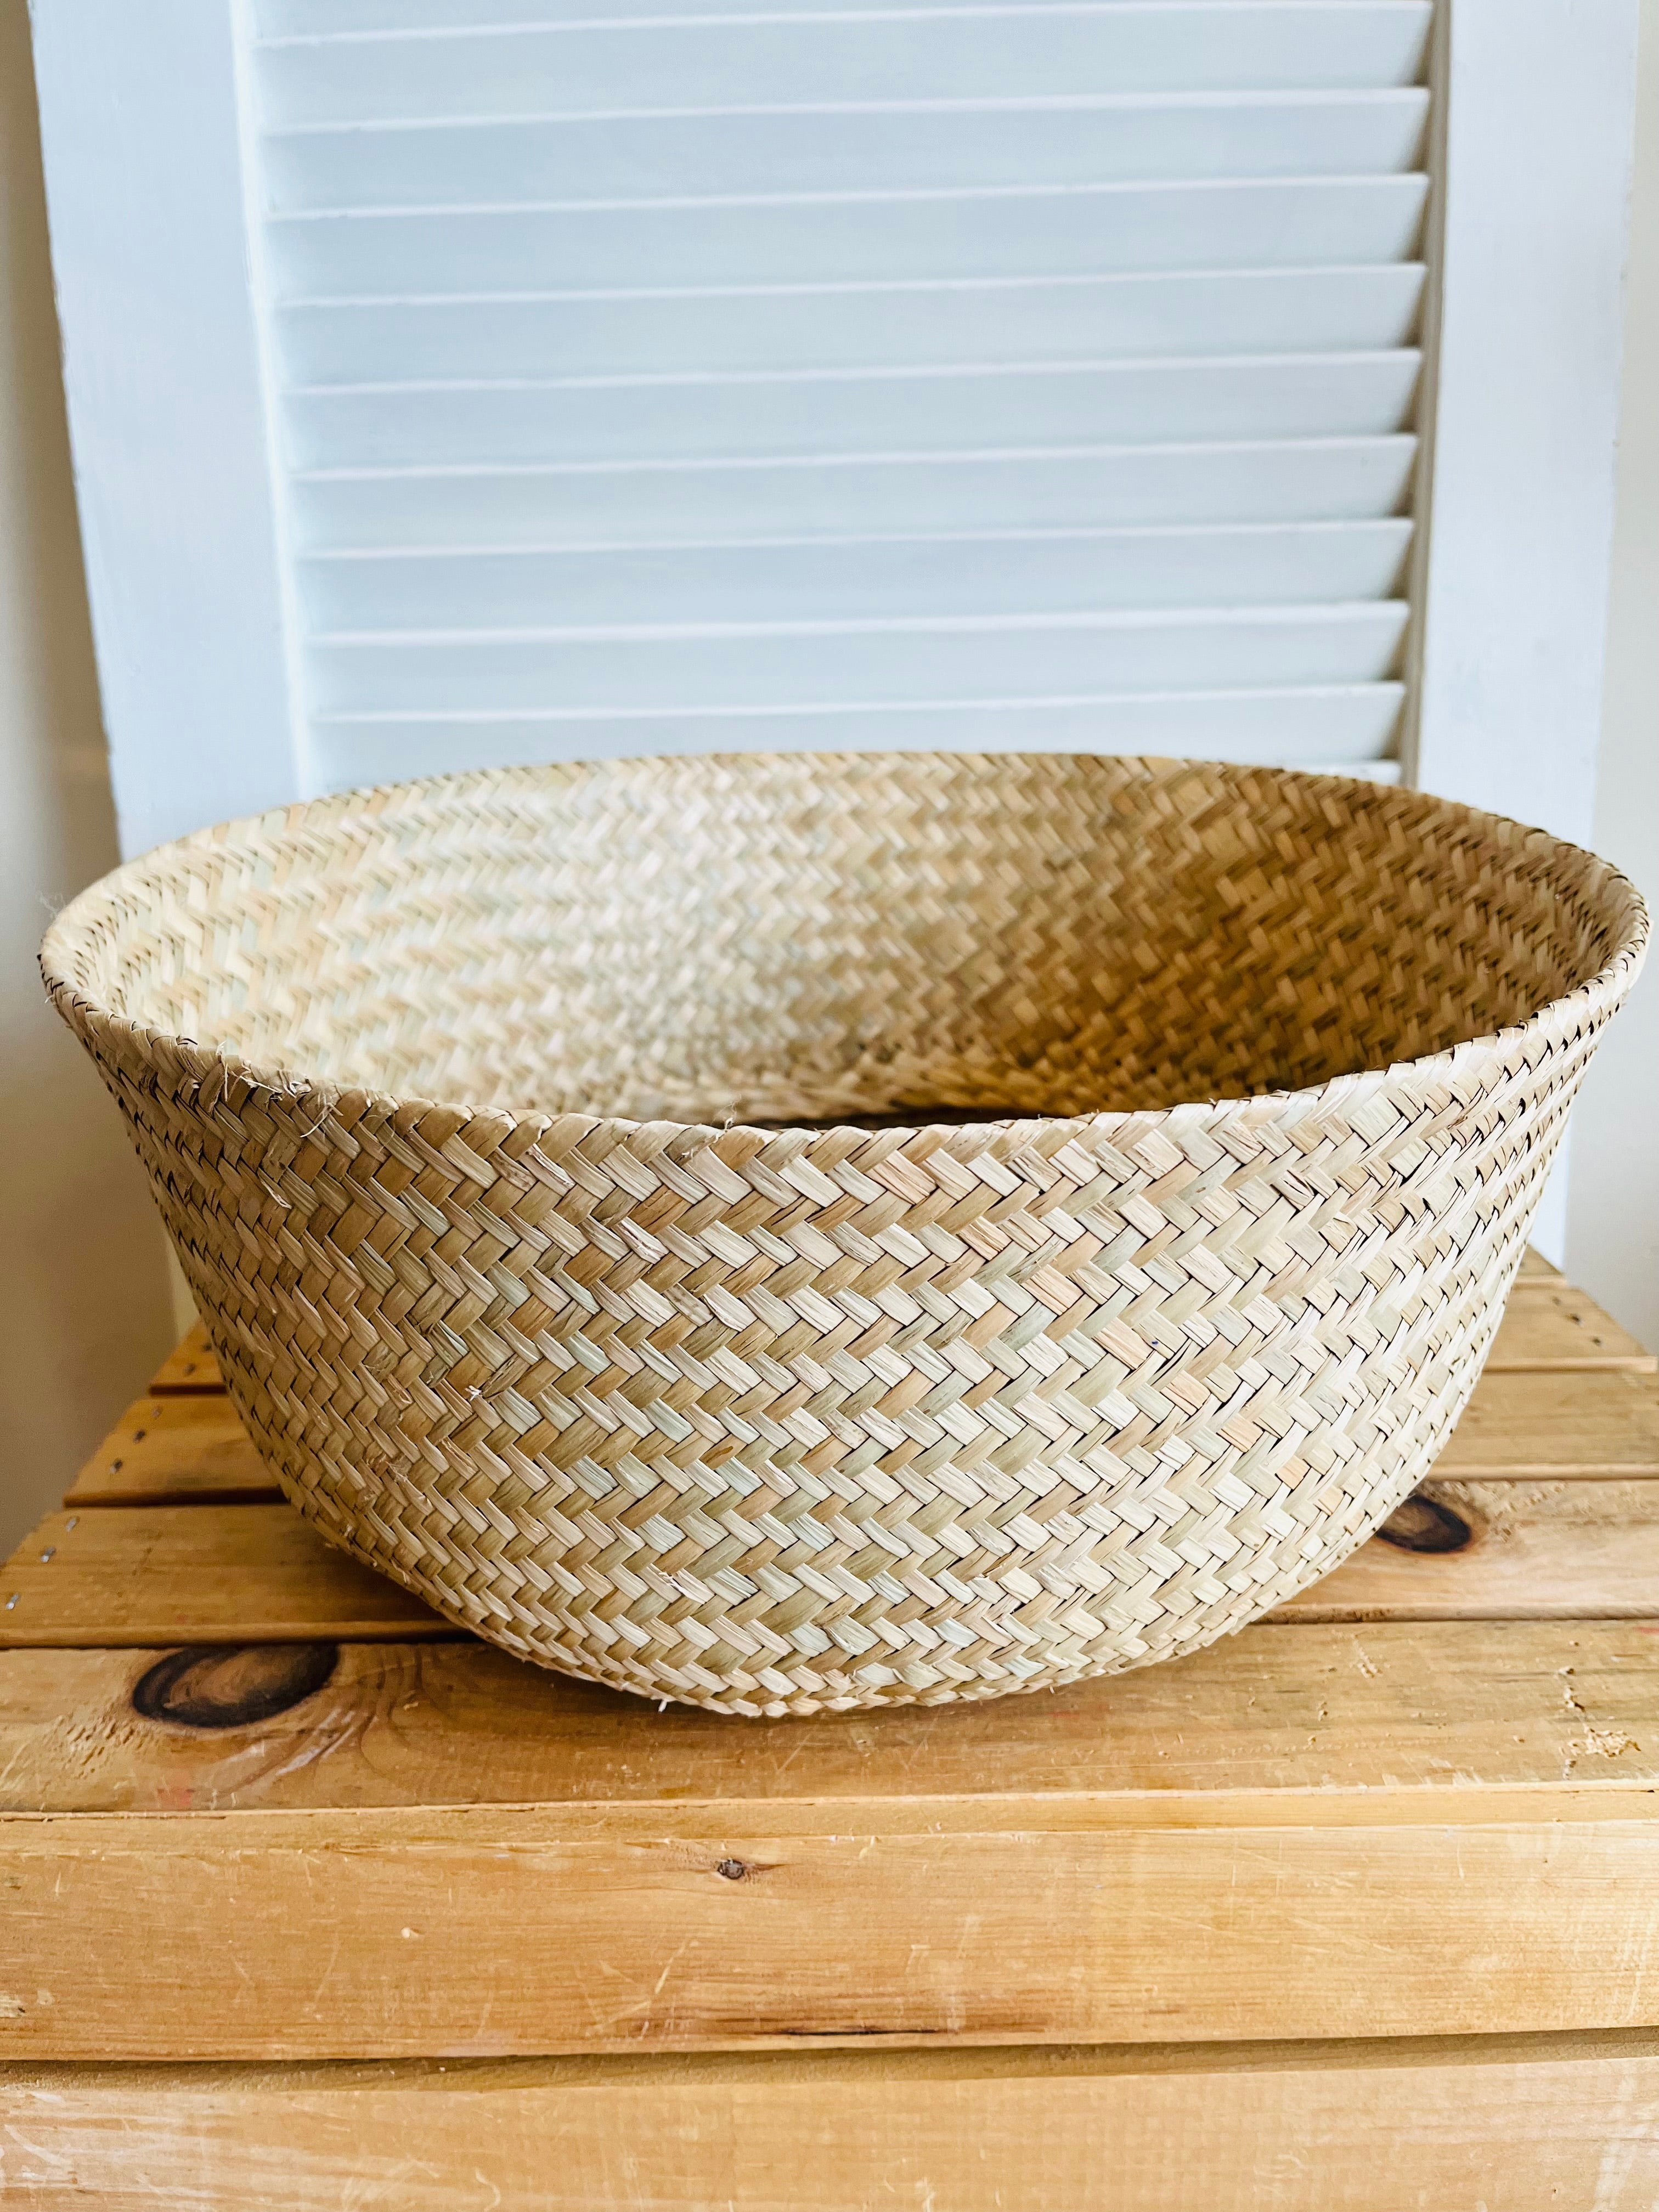 Collapsible basket